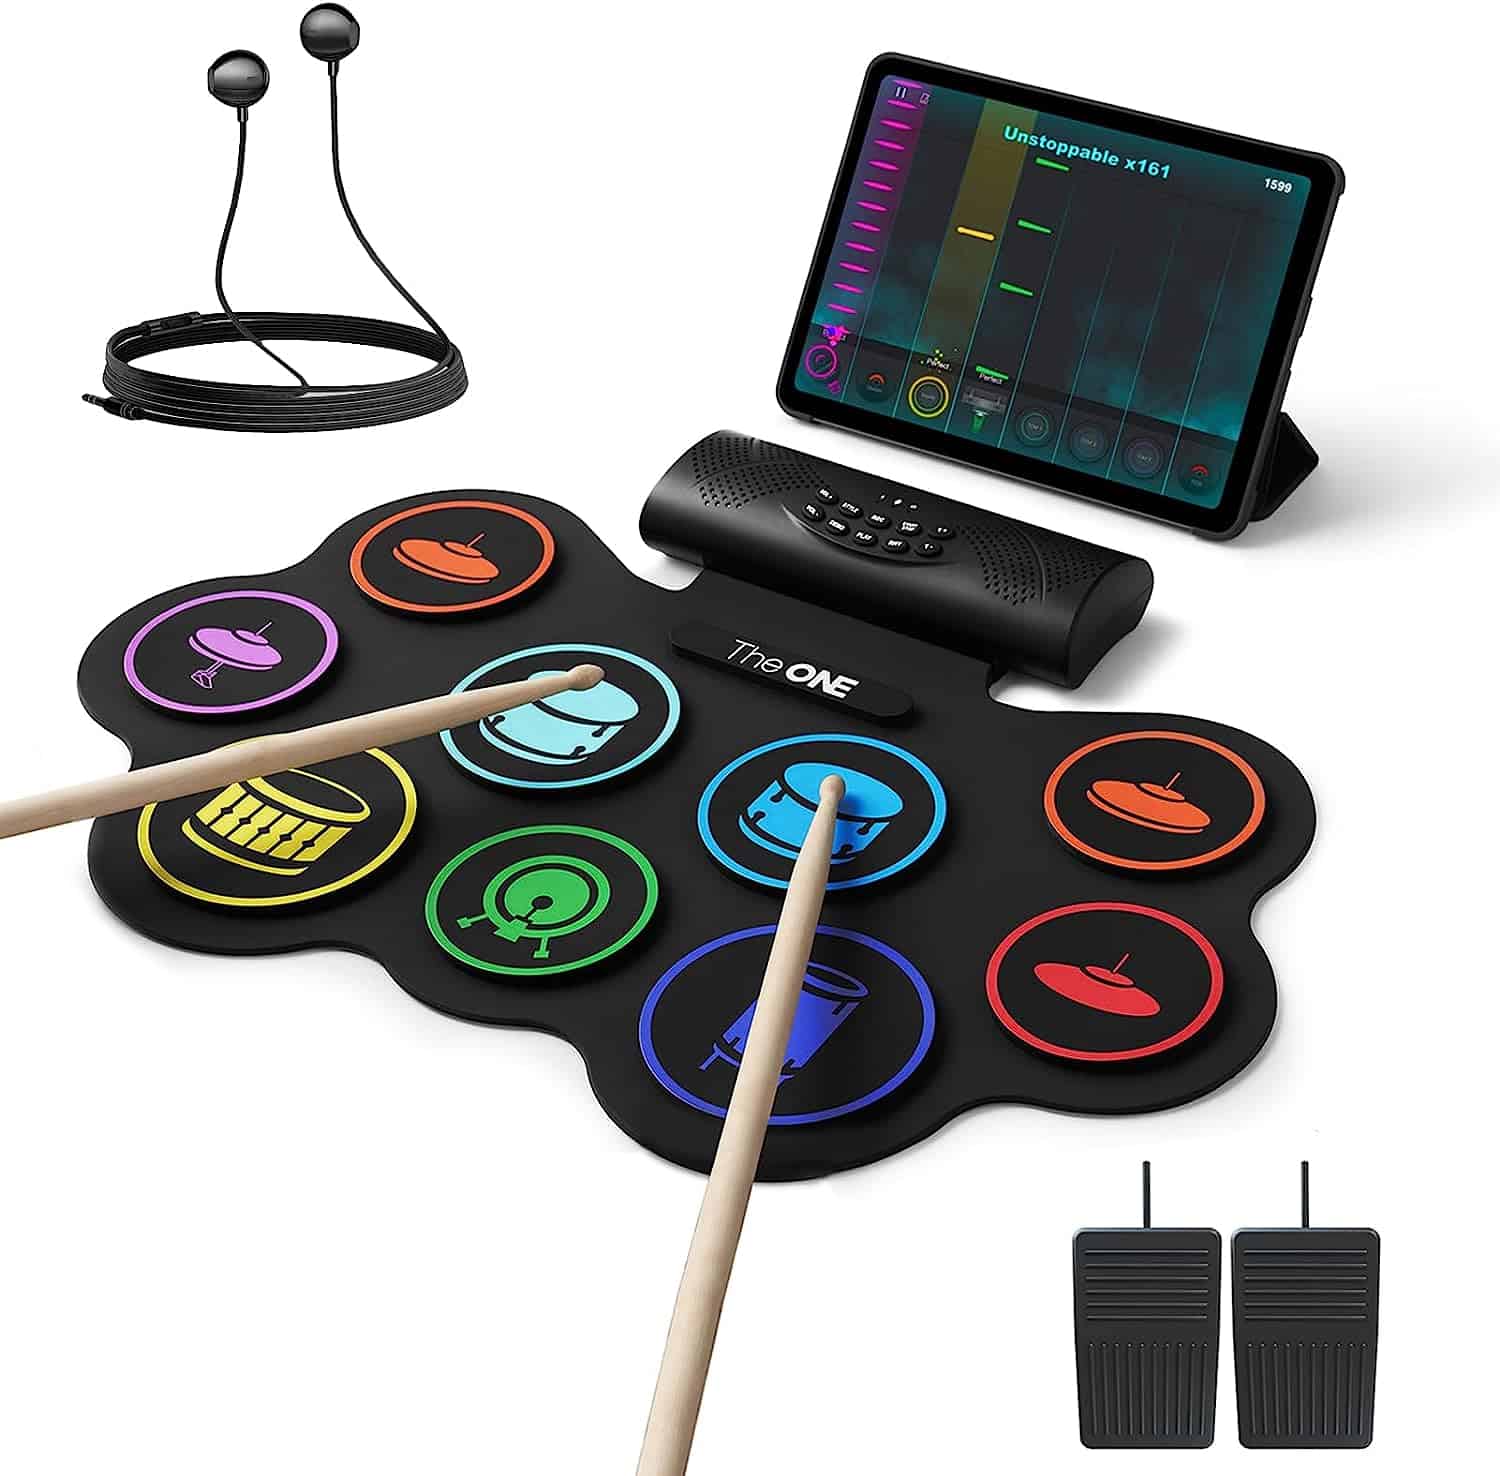 The ONE 9 Drum Pads Roll Up Drum Kit, Electronic Drum Set With Headphone, Free App, Built-in Speaker, Drum Sticks, Drum Pedals, Support Bluetooth MIDI/Recording, Great Holiday/Birthday Gift for Kids